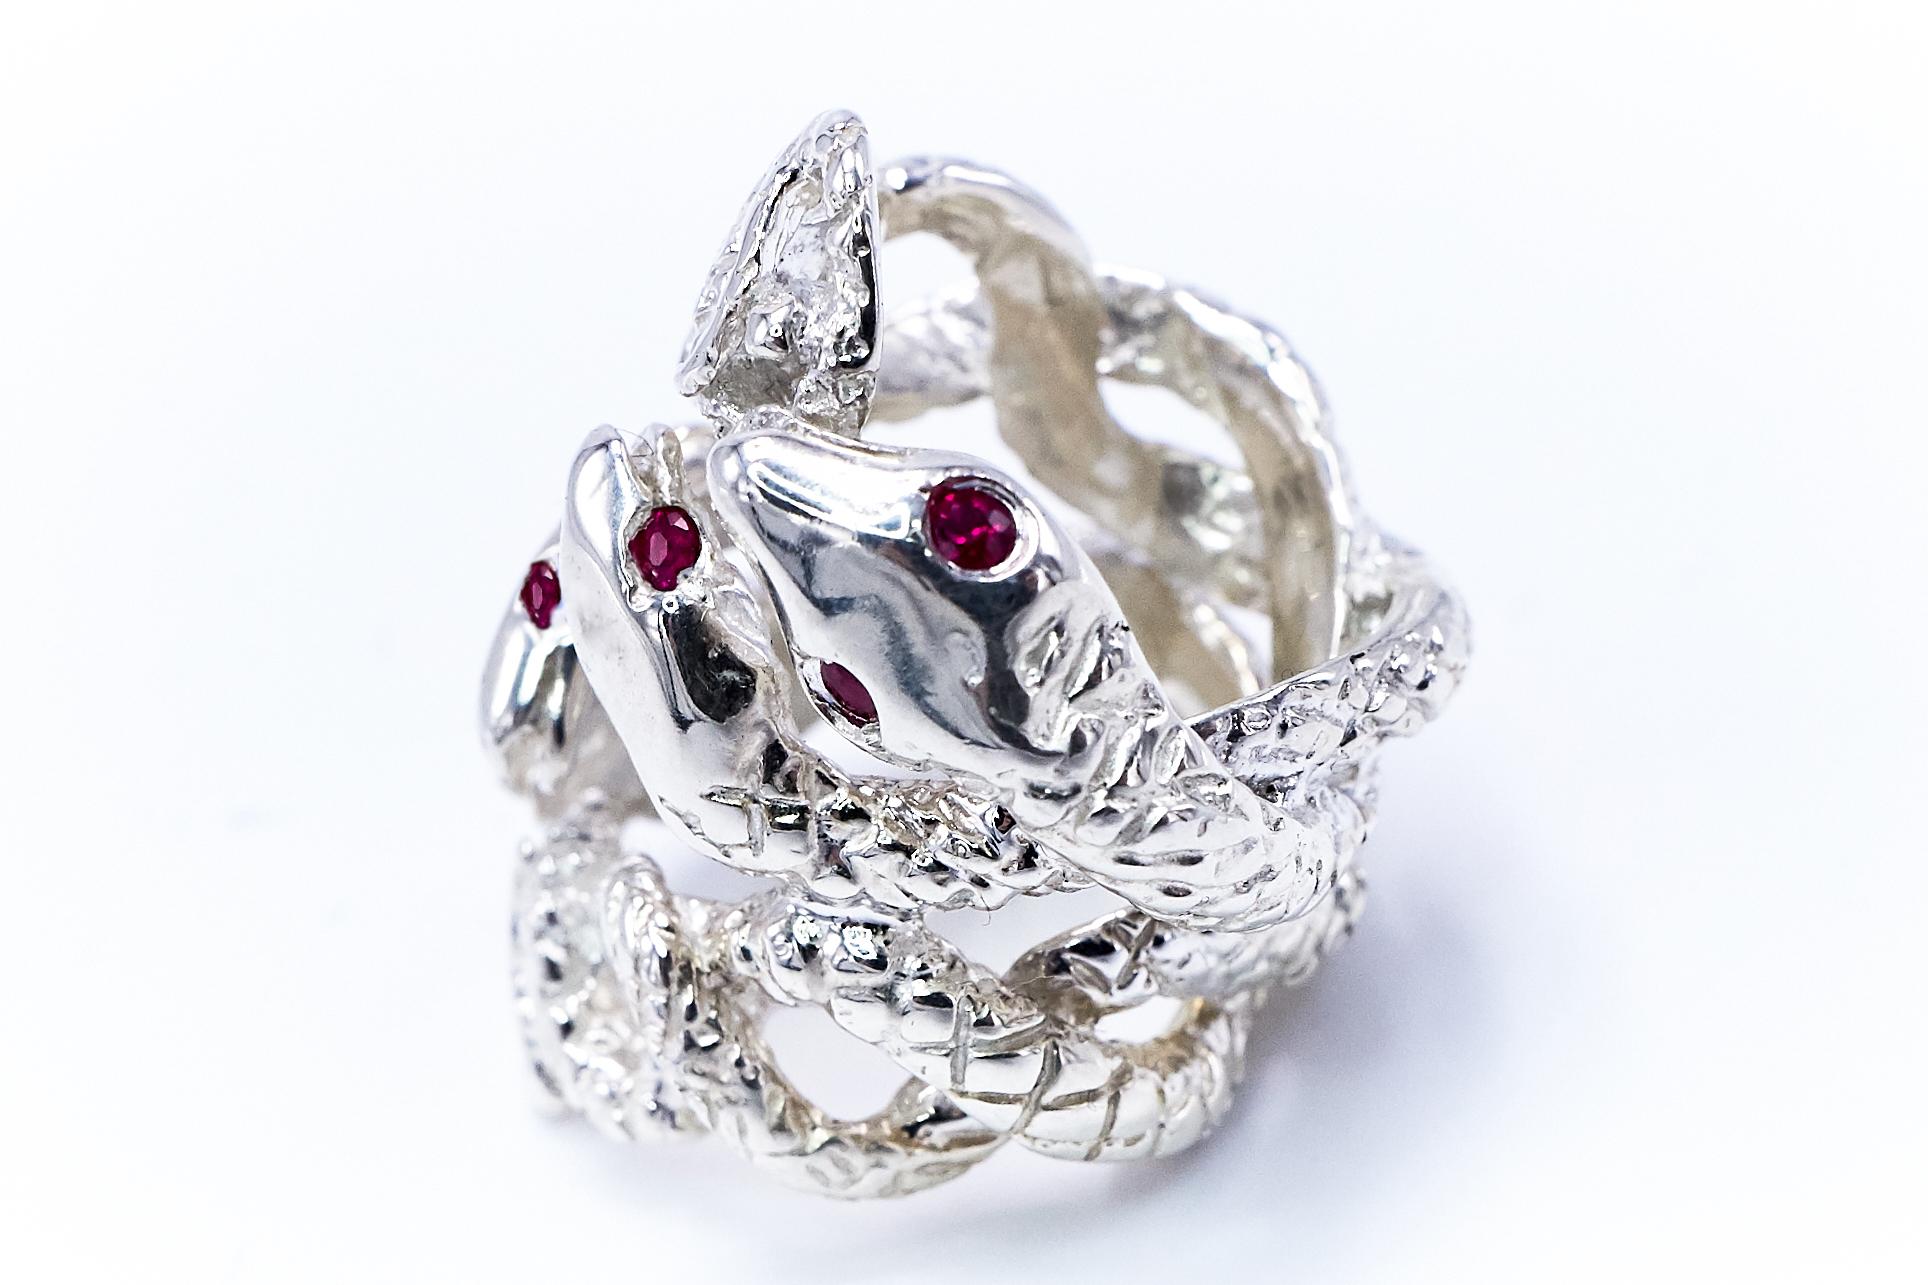 Round Cut Ruby Snake Ring Silver Statement Cocktail Ring Adjustable Onesie J Dauphin For Sale